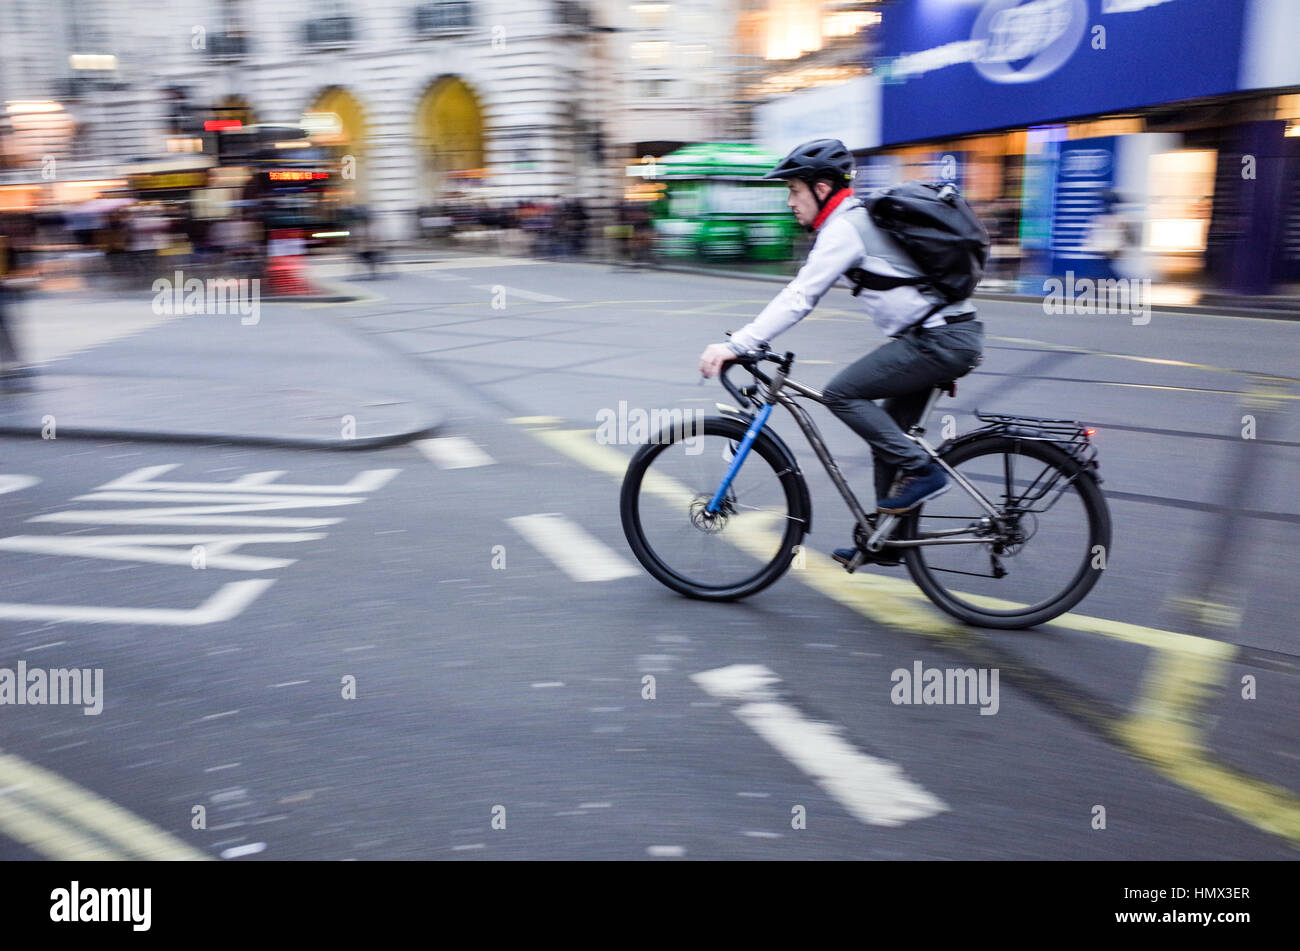 A commuter rides through Central London Stock Photo